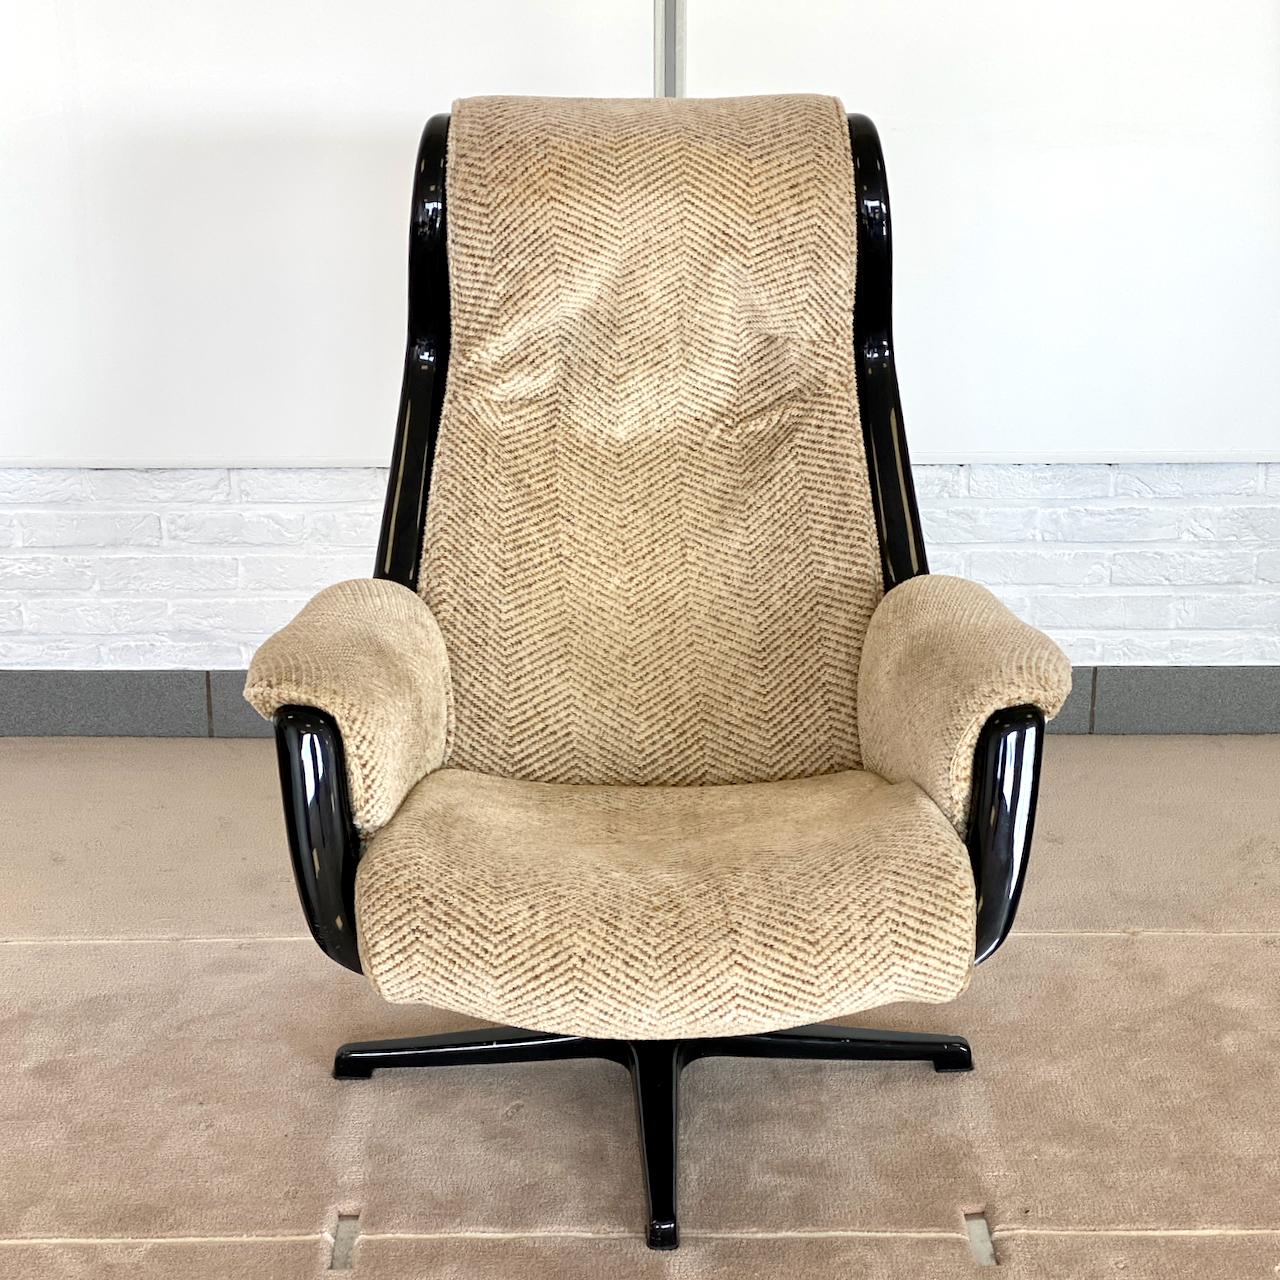 ALAXY LOUNGE CHAIR FOR DUX BY ALF STEVENSON EN YNGVAR SANDSTORM

Galaxy lounge chair

by Alf Stevenson & Yngvar Sandstrom

for DUX

Late 1960's - early 70's
Made in Sweden

Space age design

Original corderoy fabric

The shell is in molded